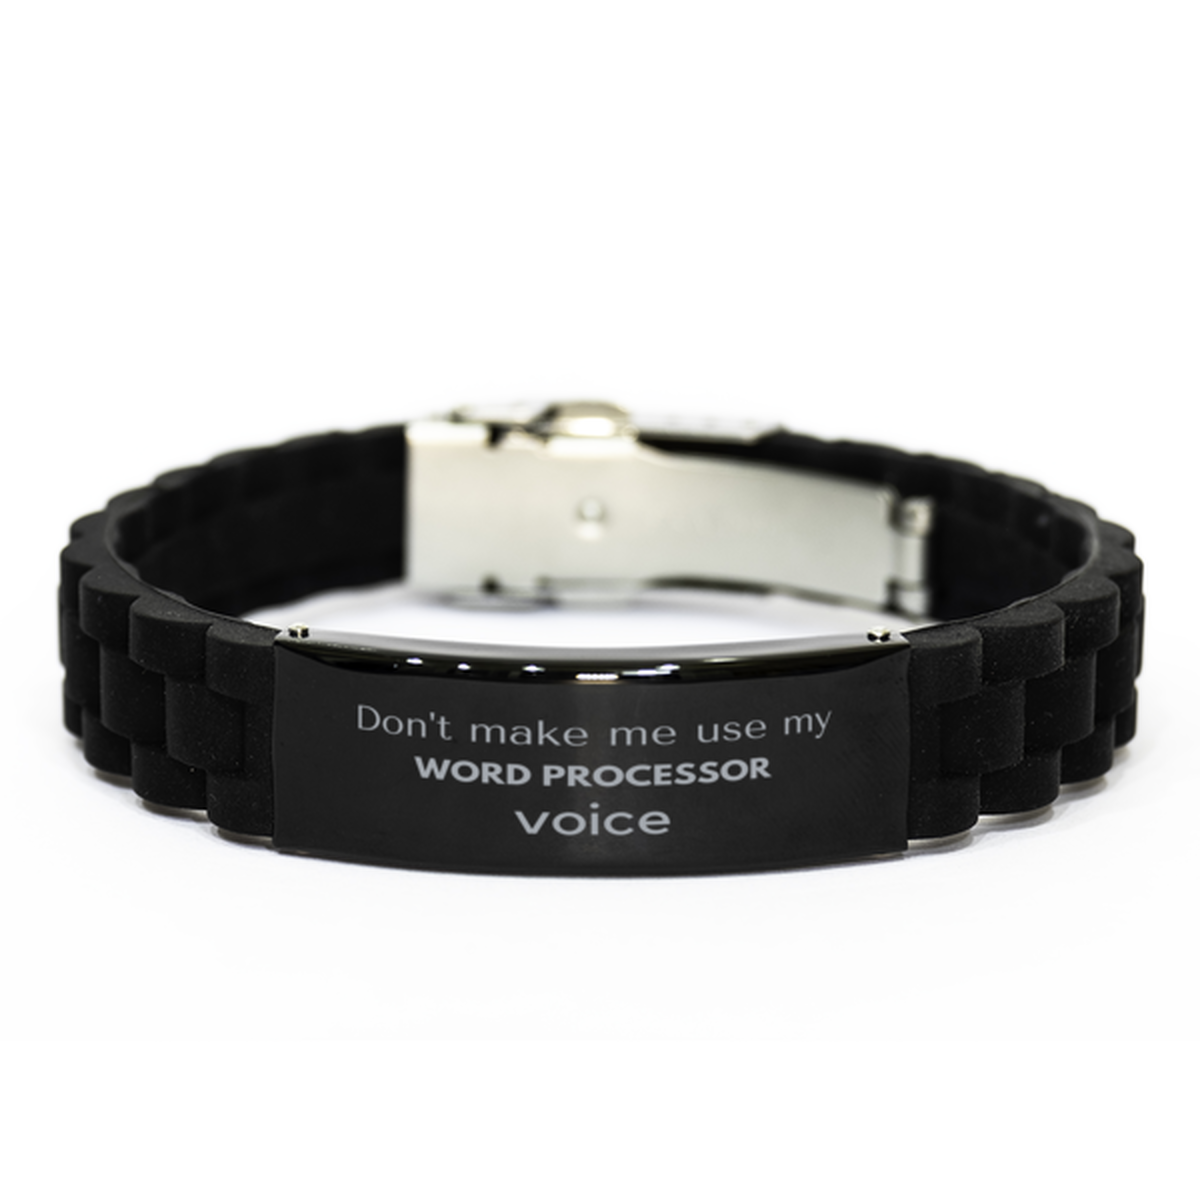 Don't make me use my Word Processor voice, Sarcasm Word Processor Gifts, Christmas Word Processor Black Glidelock Clasp Bracelet Birthday Unique Gifts For Word Processor Coworkers, Men, Women, Colleague, Friends